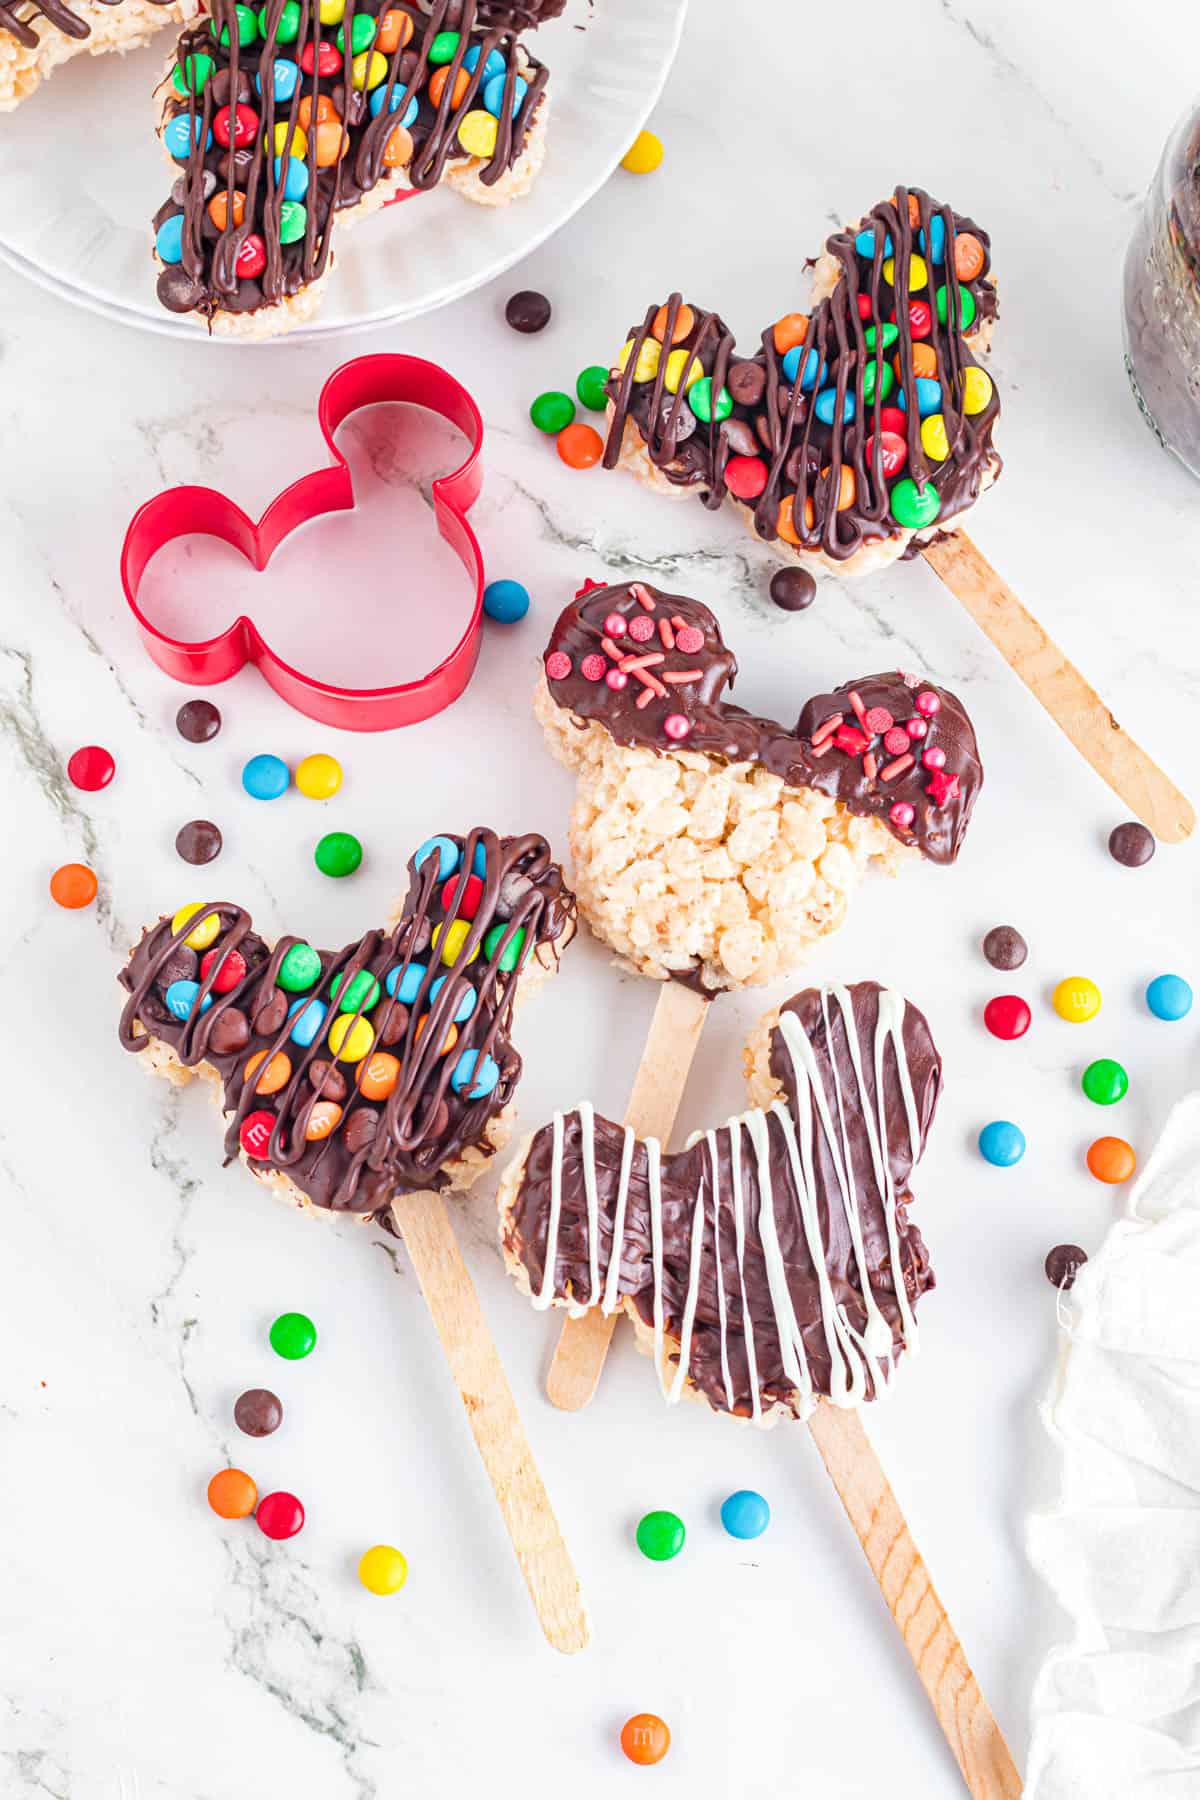 Rice Krispy Treat Pops Dipped in Chocolate on a Stick